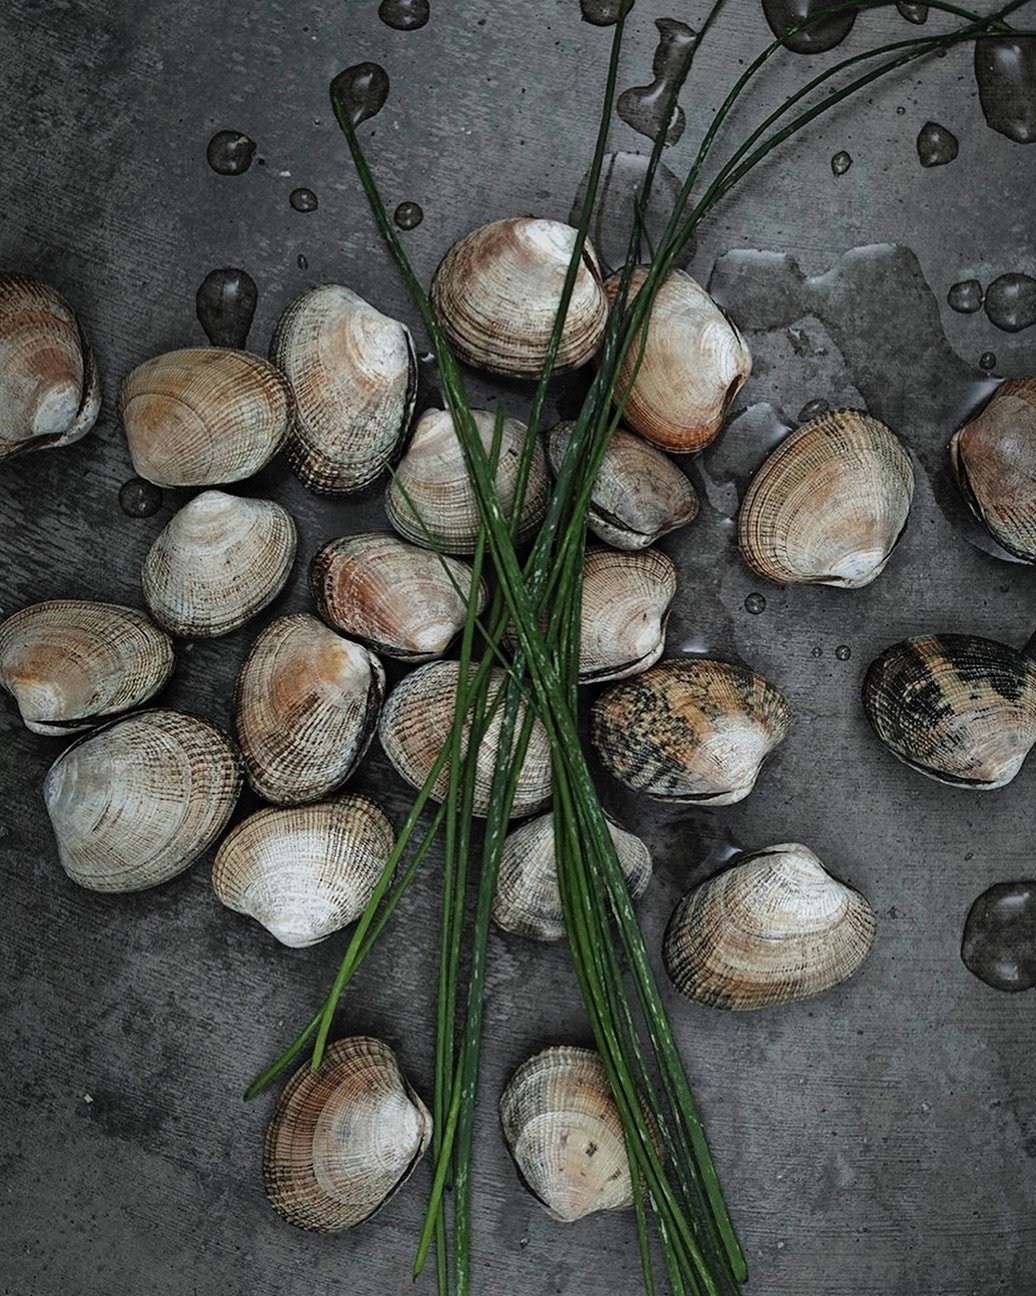 From our shellfish selection 🐚 Wild clams.